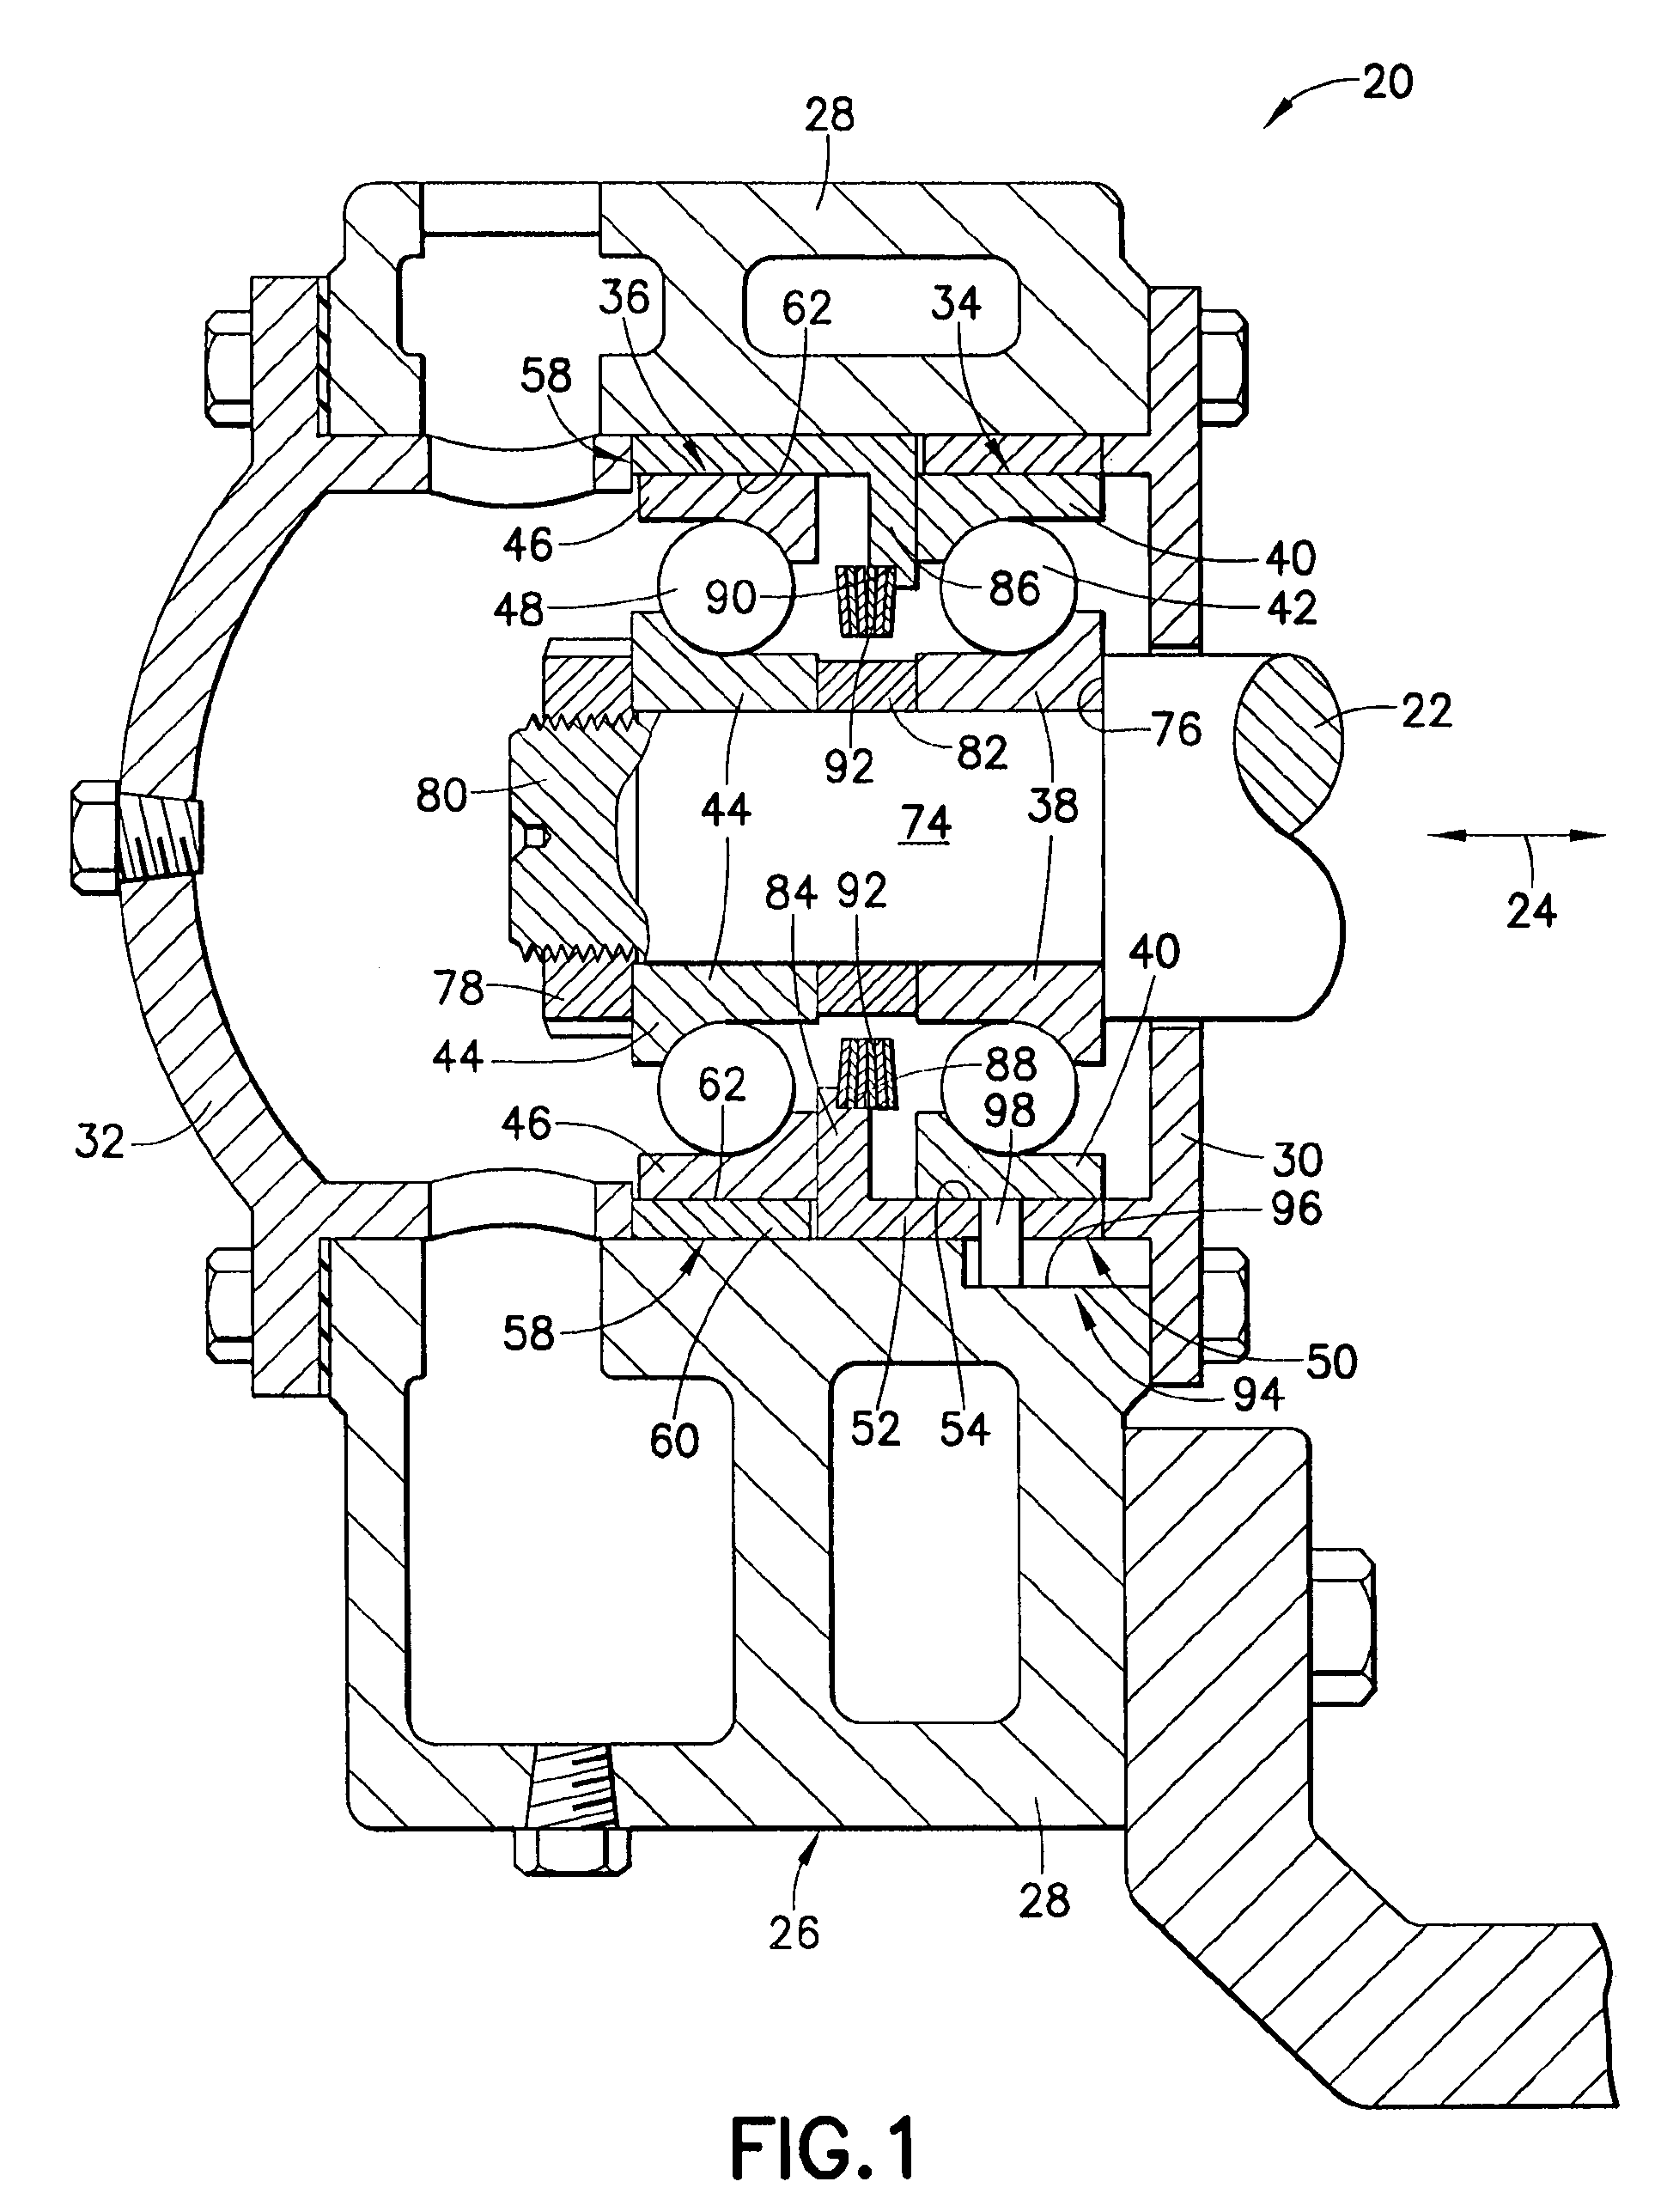 Bearing preload cage assembly